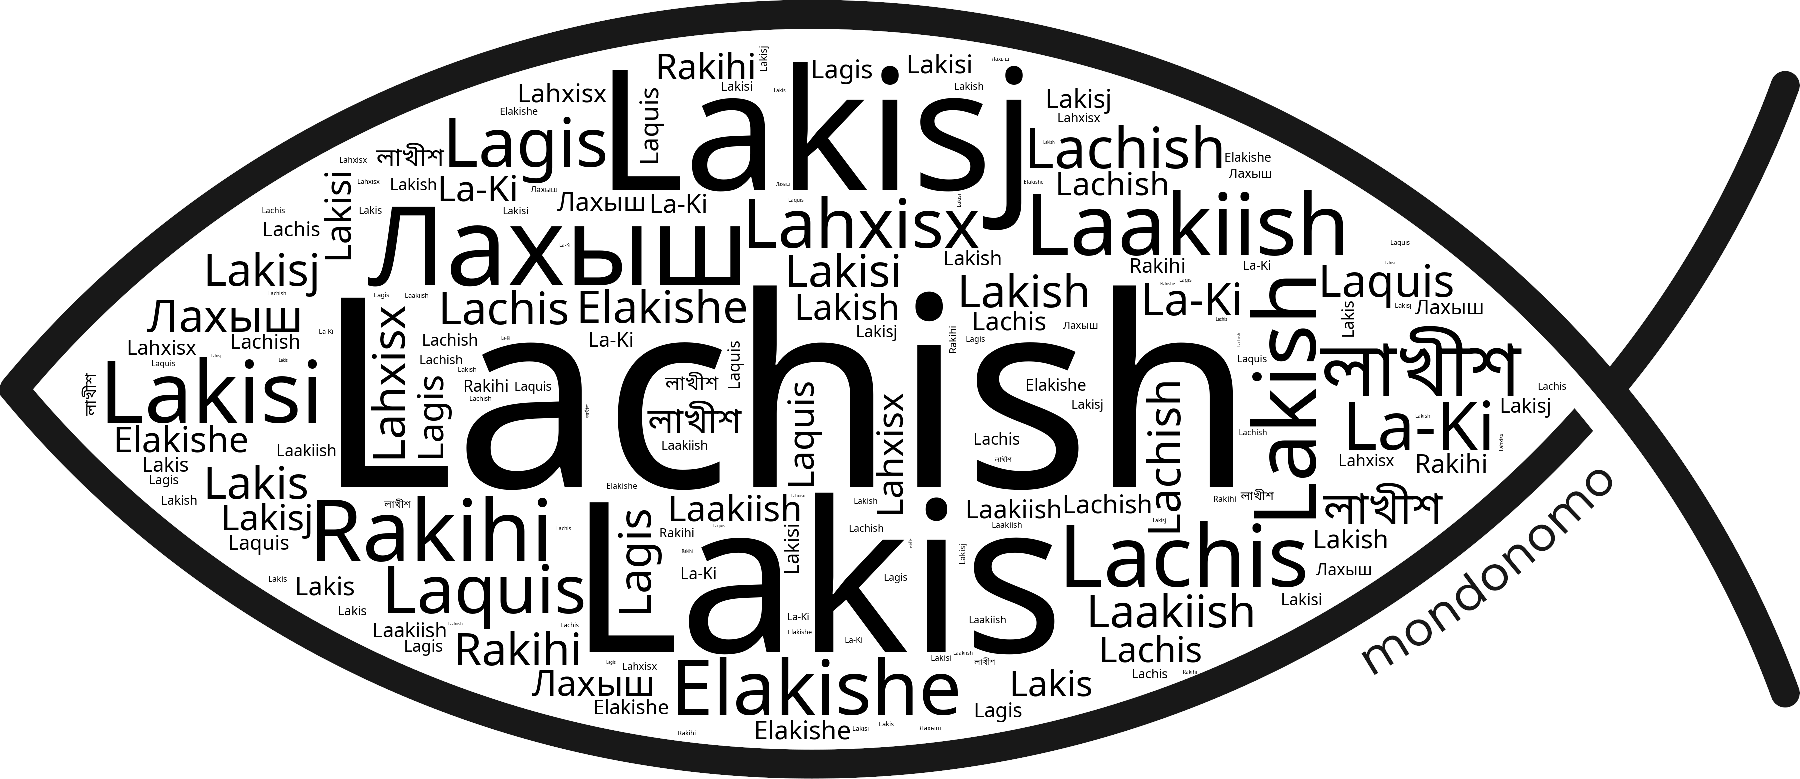 Name Lachish in the world's Bibles